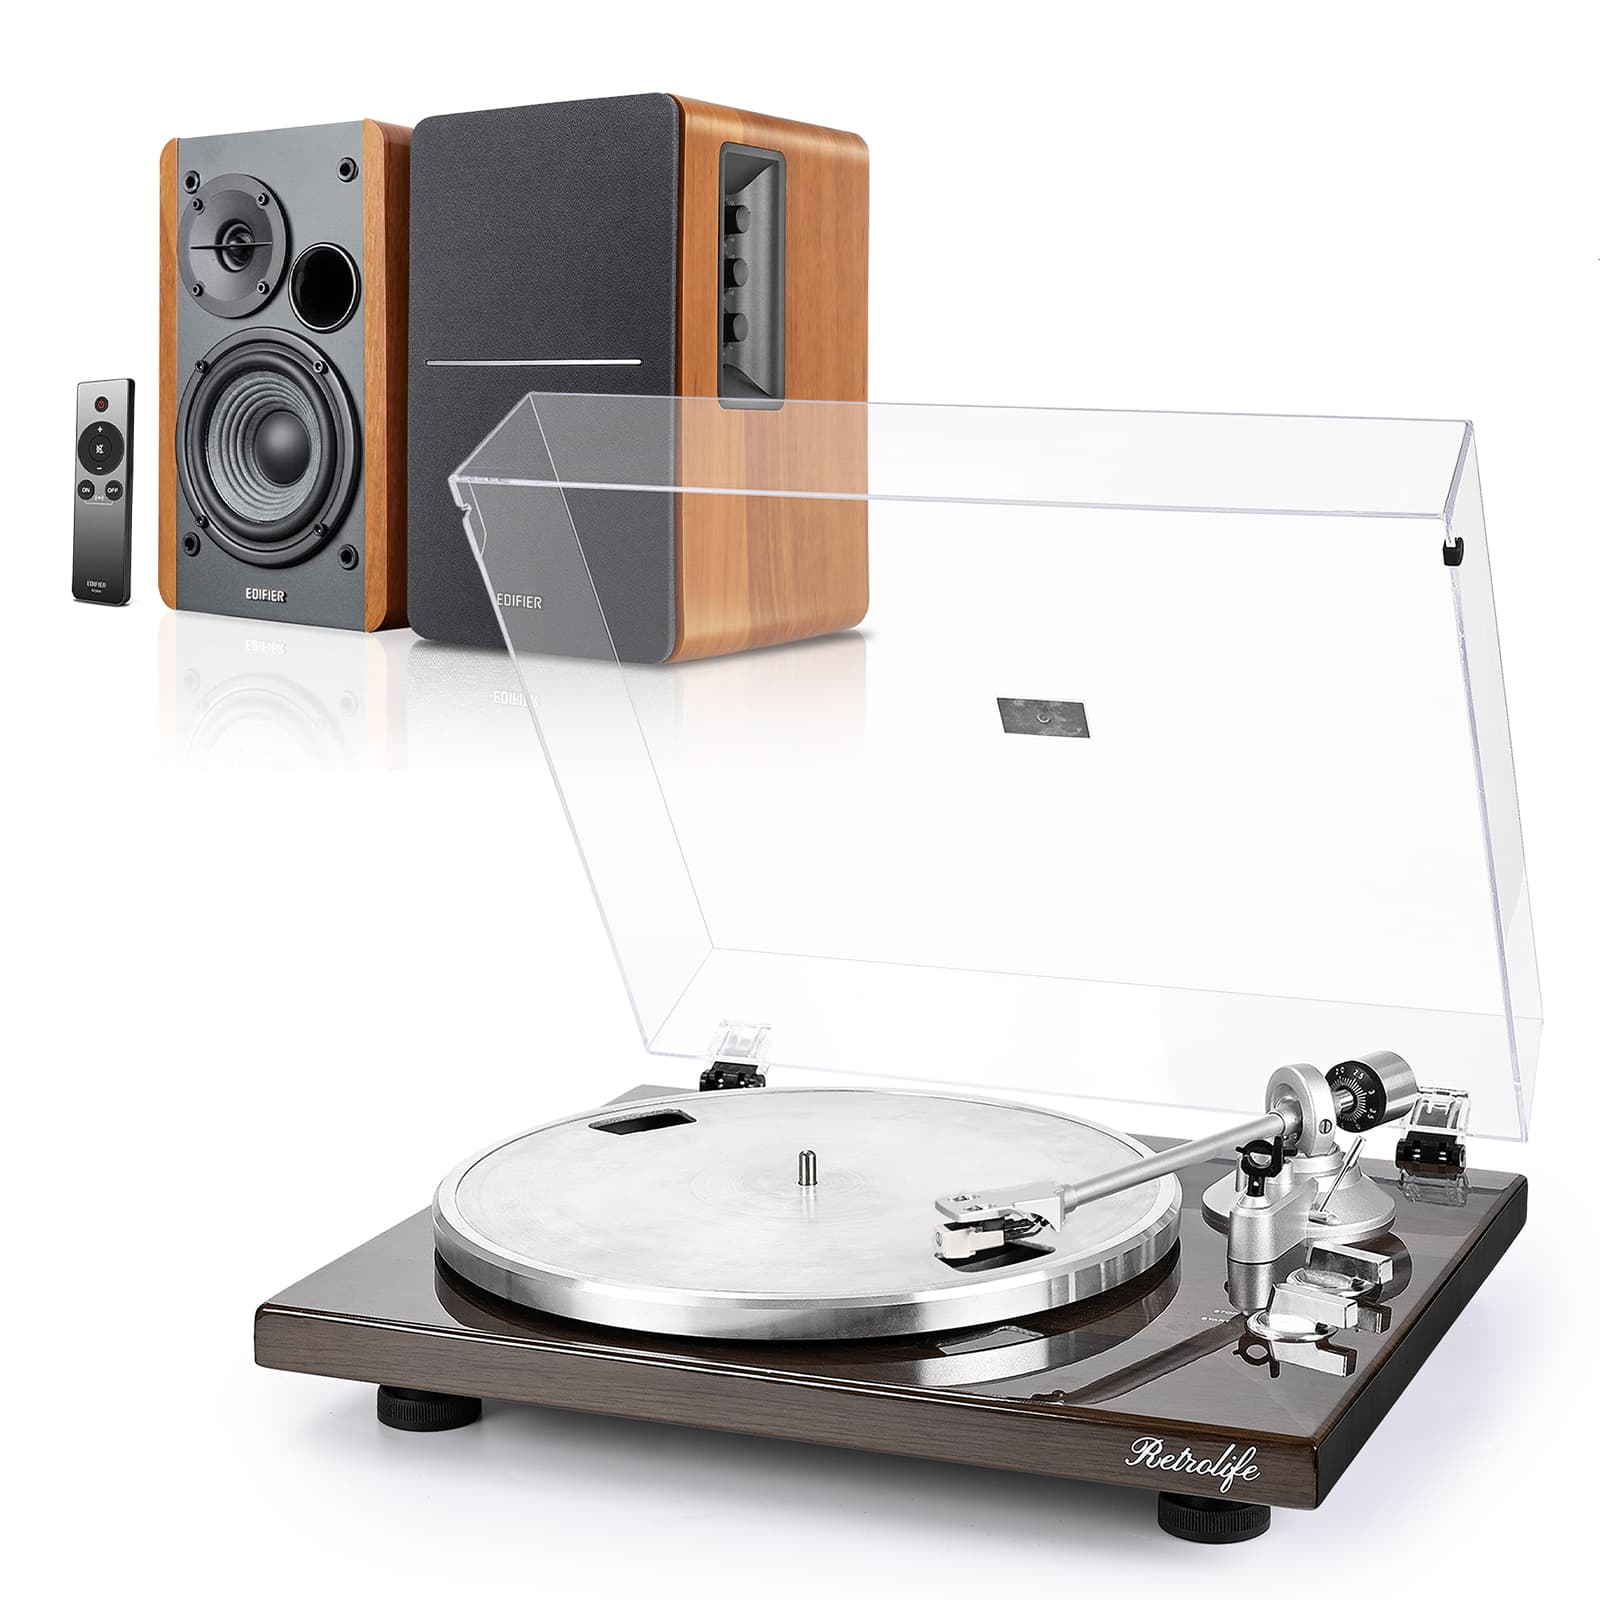 HQKZ-006 High Fidelity Turntable with Edifier R1280Ts 42W Powered Speakers